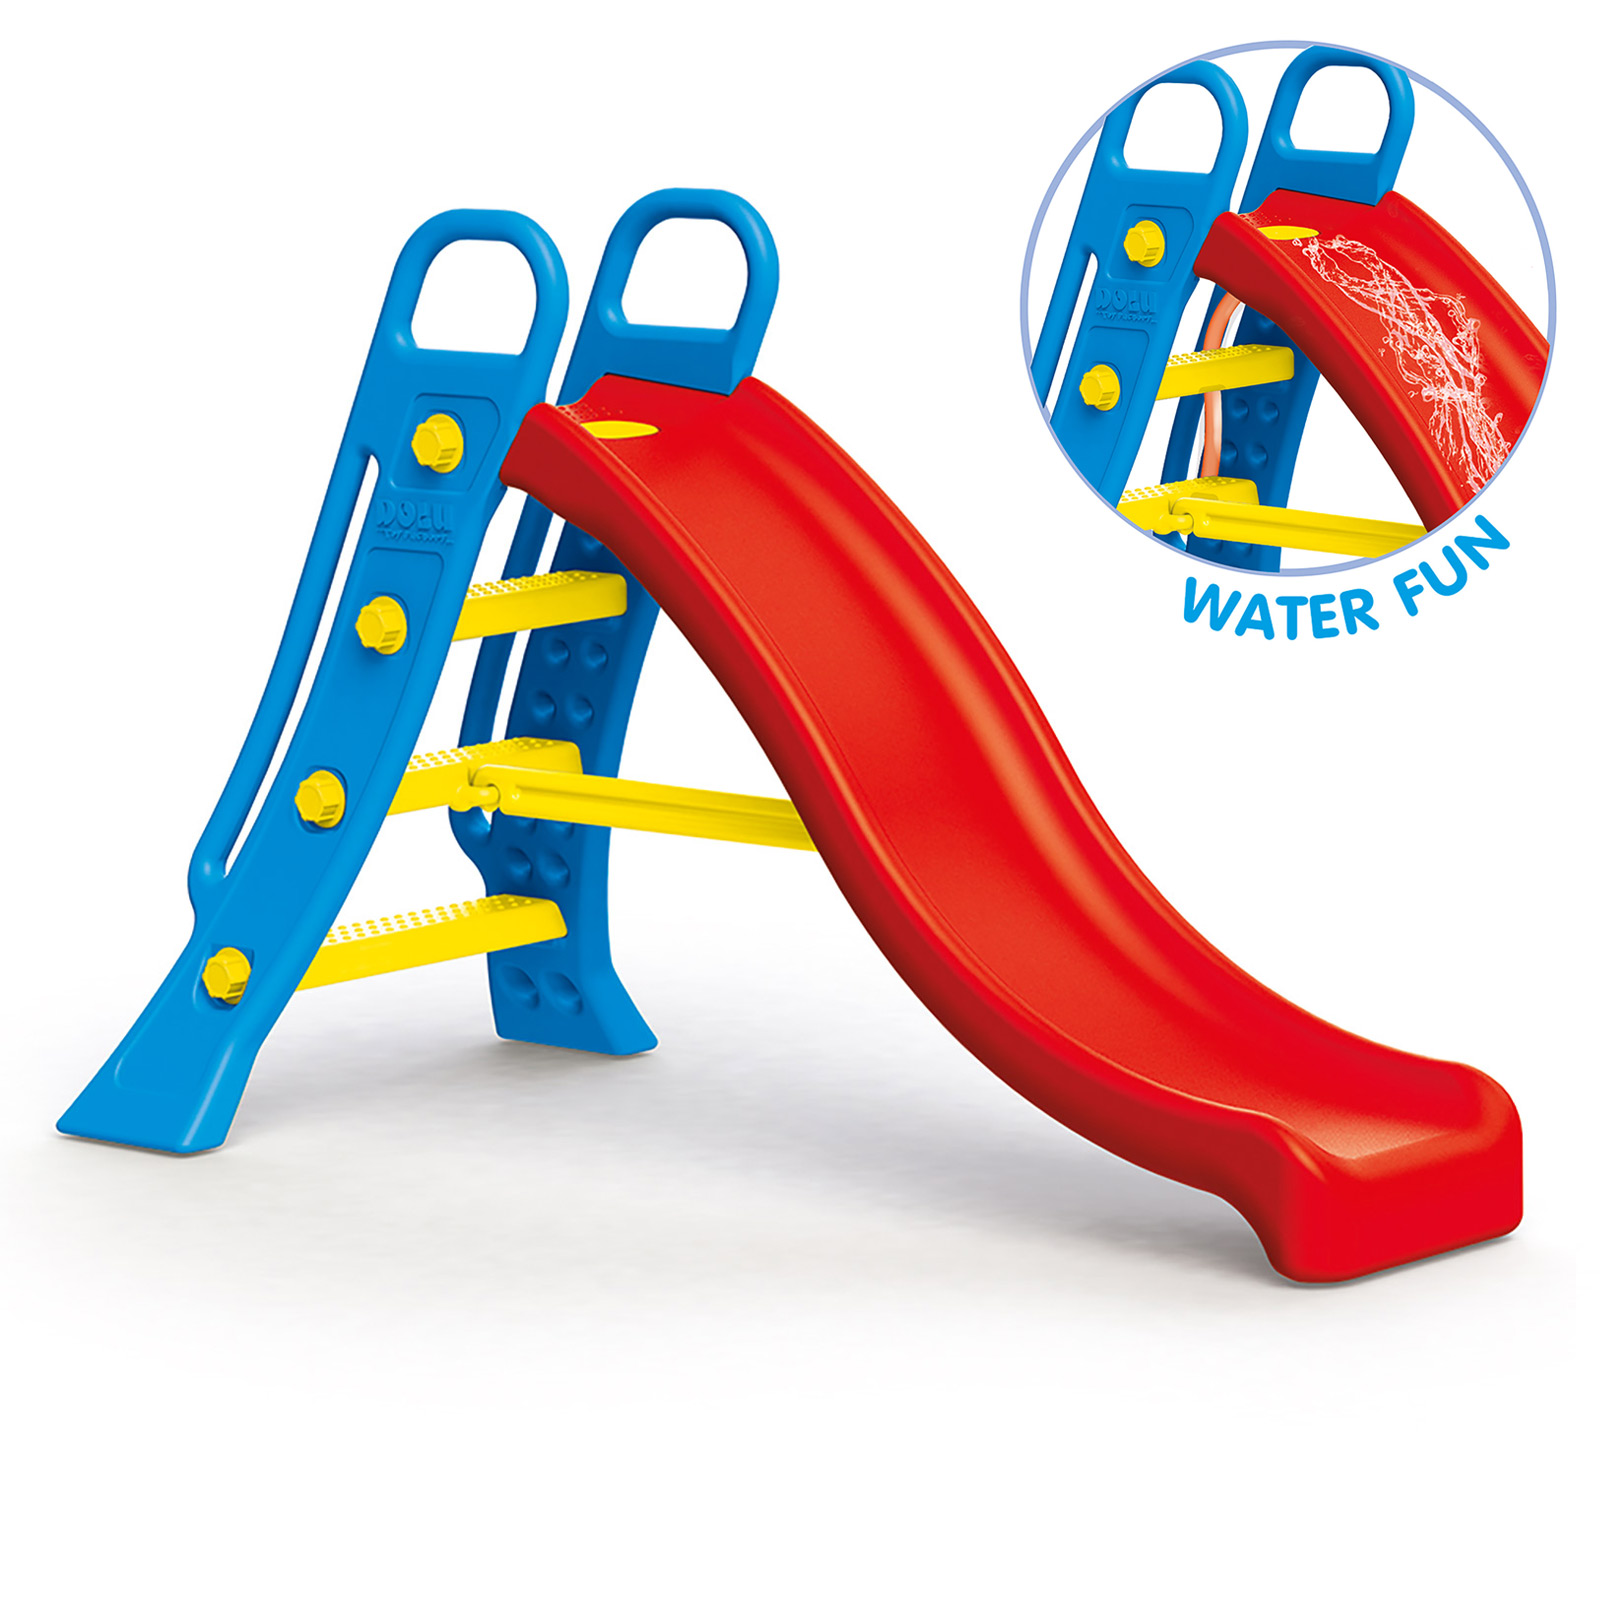 2in1 Water Slide - Red/Blue/Yellow (3 - 6 Years)